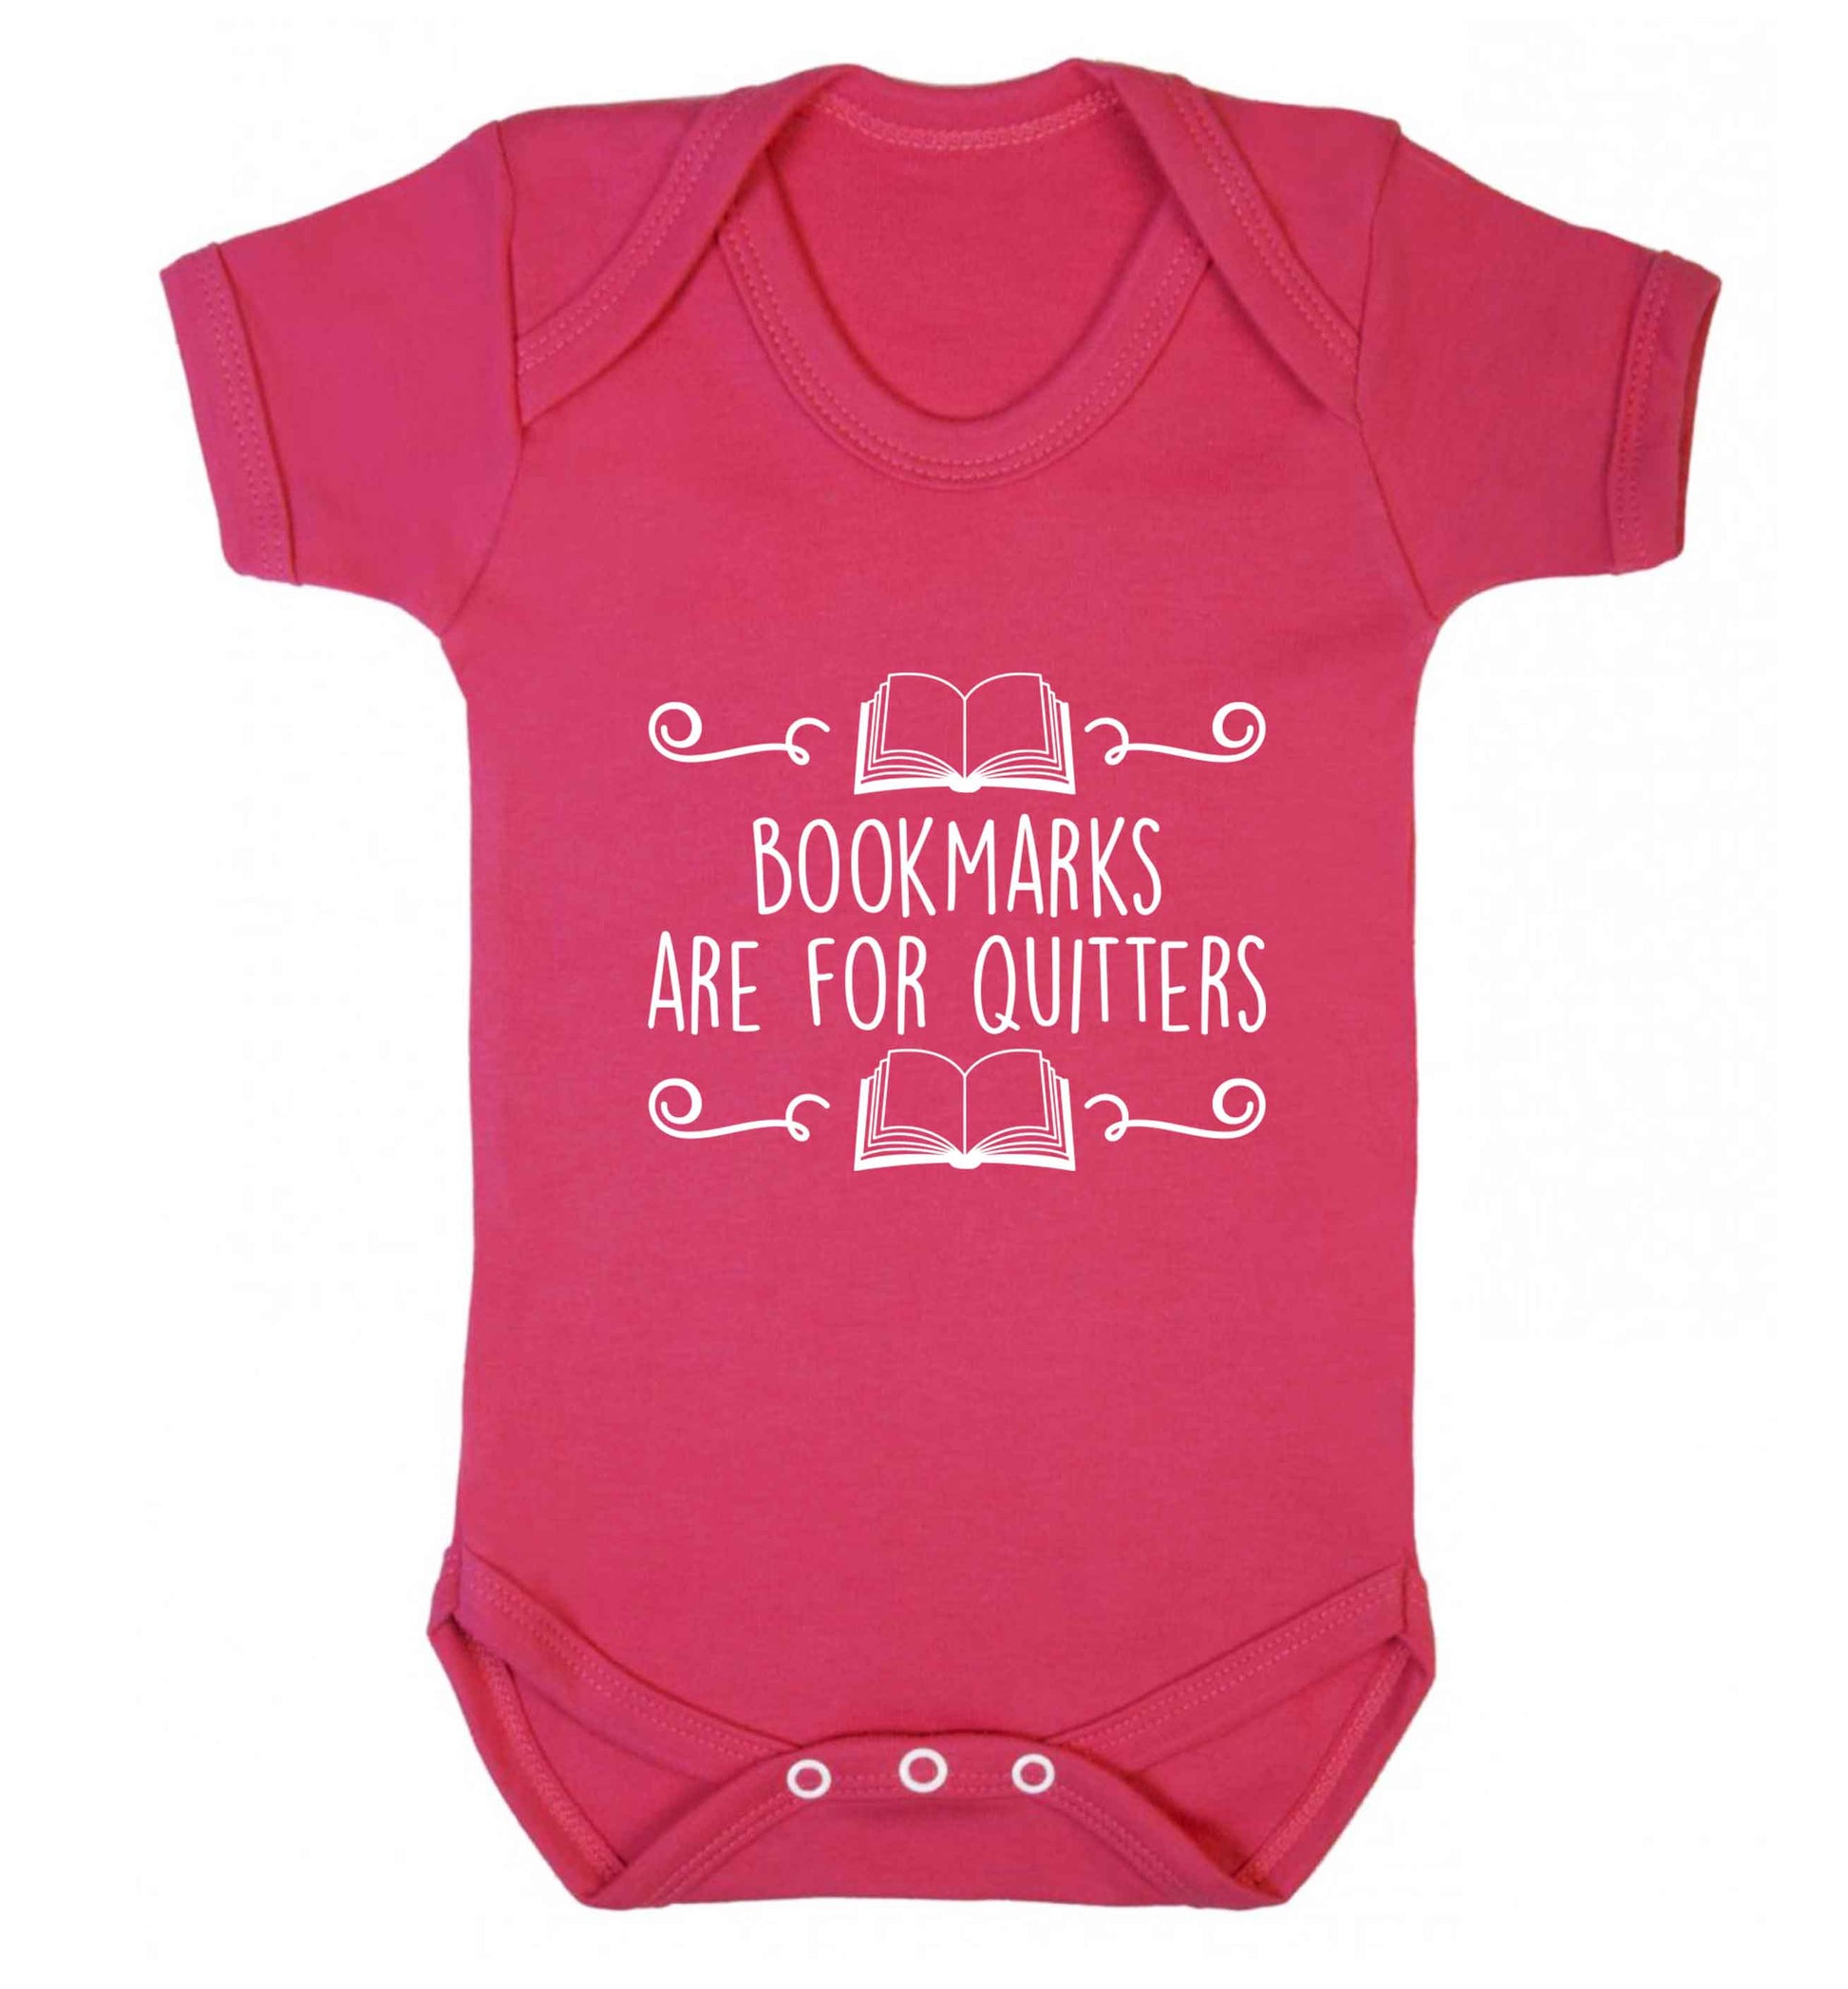 Bookmarks are for quitters baby vest dark pink 18-24 months